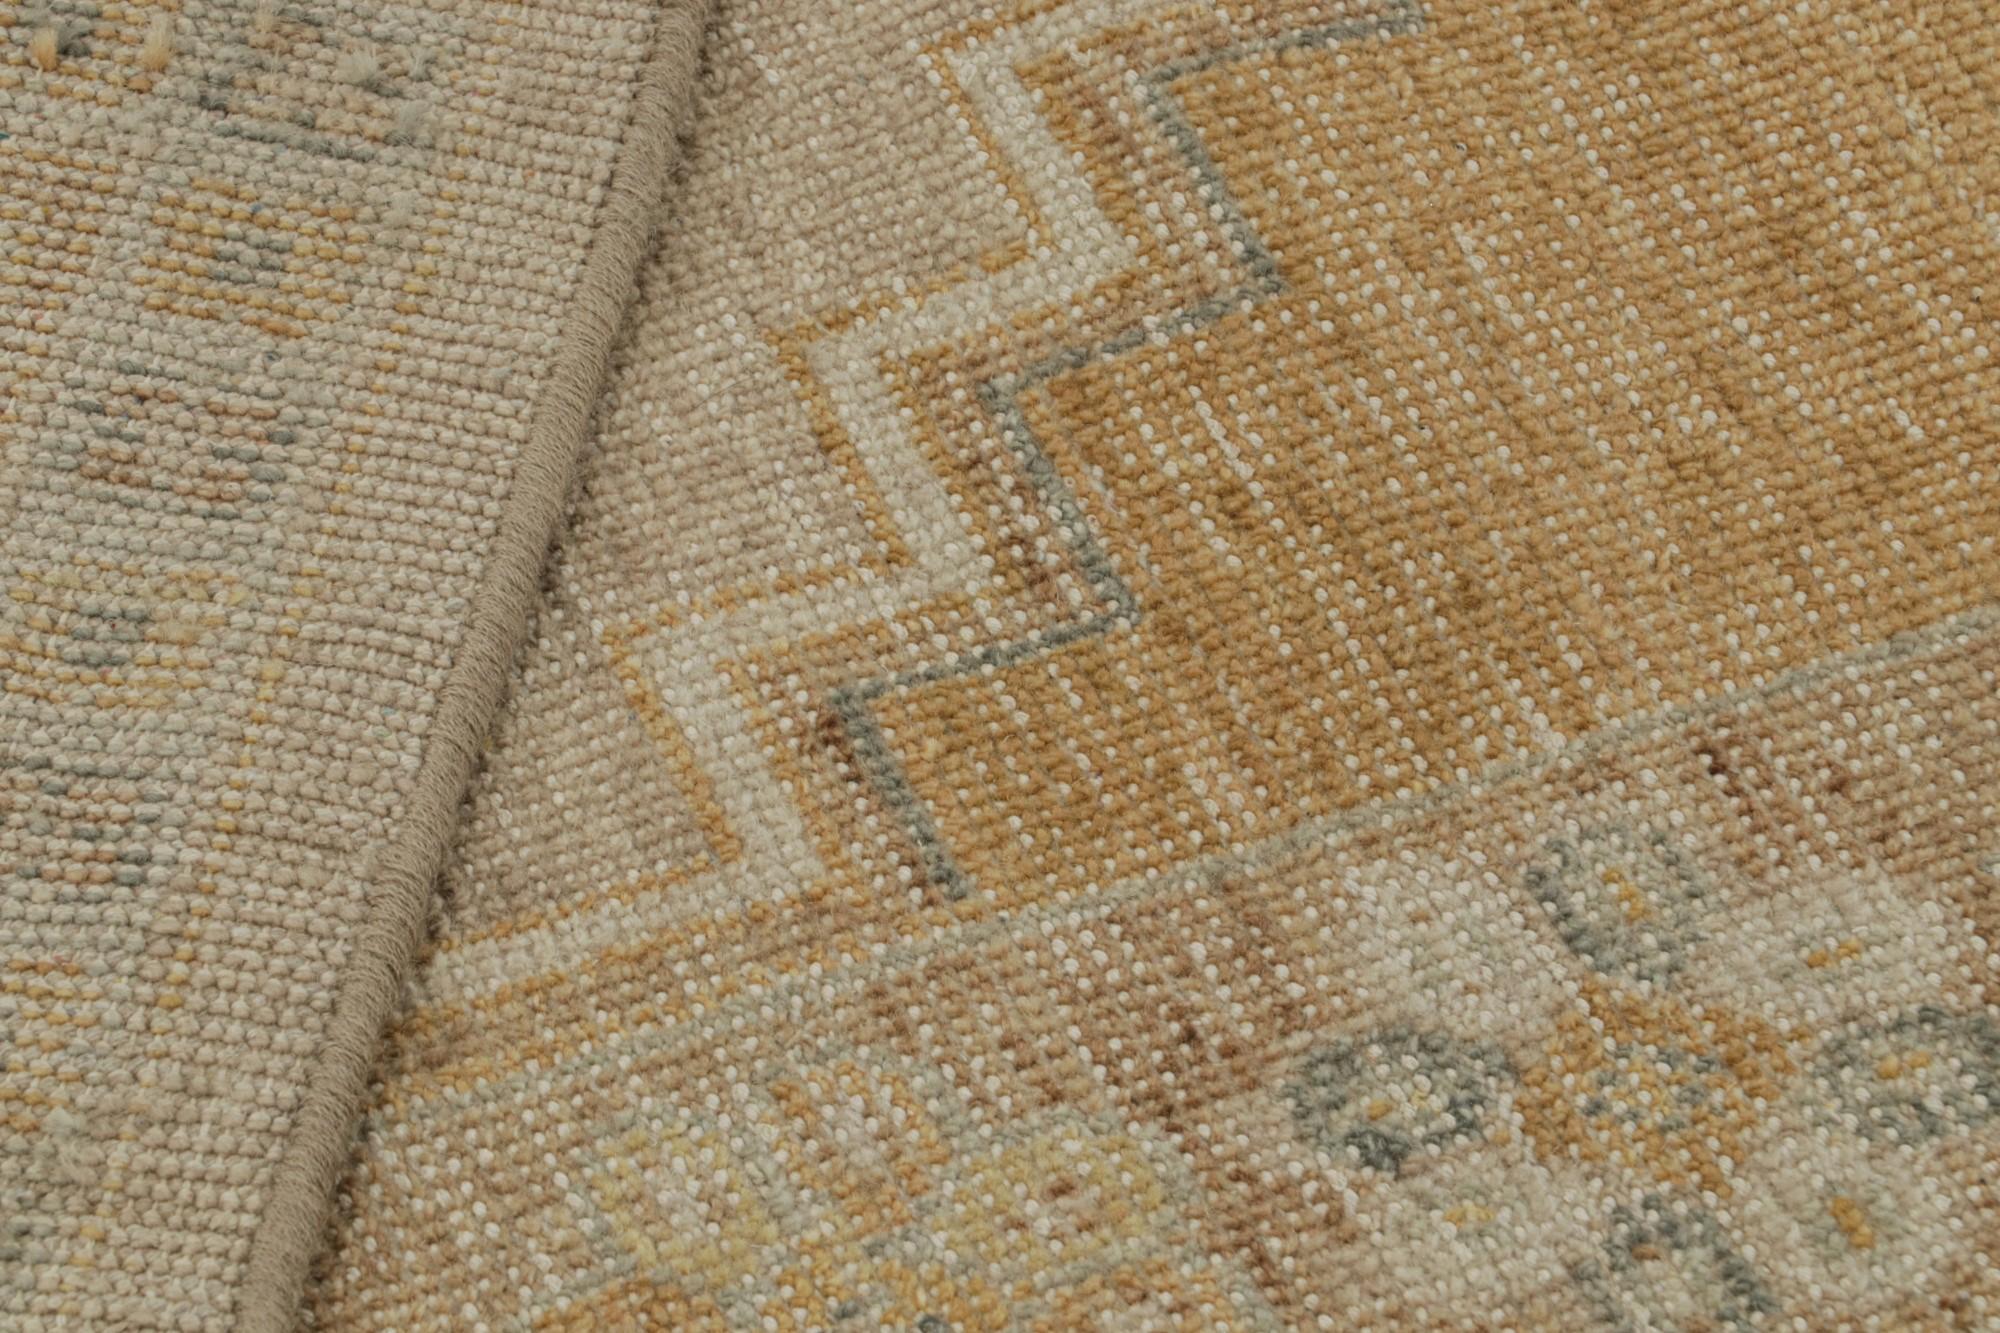 Wool Rug & Kilim’s Modern Rug in Beige and Gold Tones, with Geometric Patterns For Sale